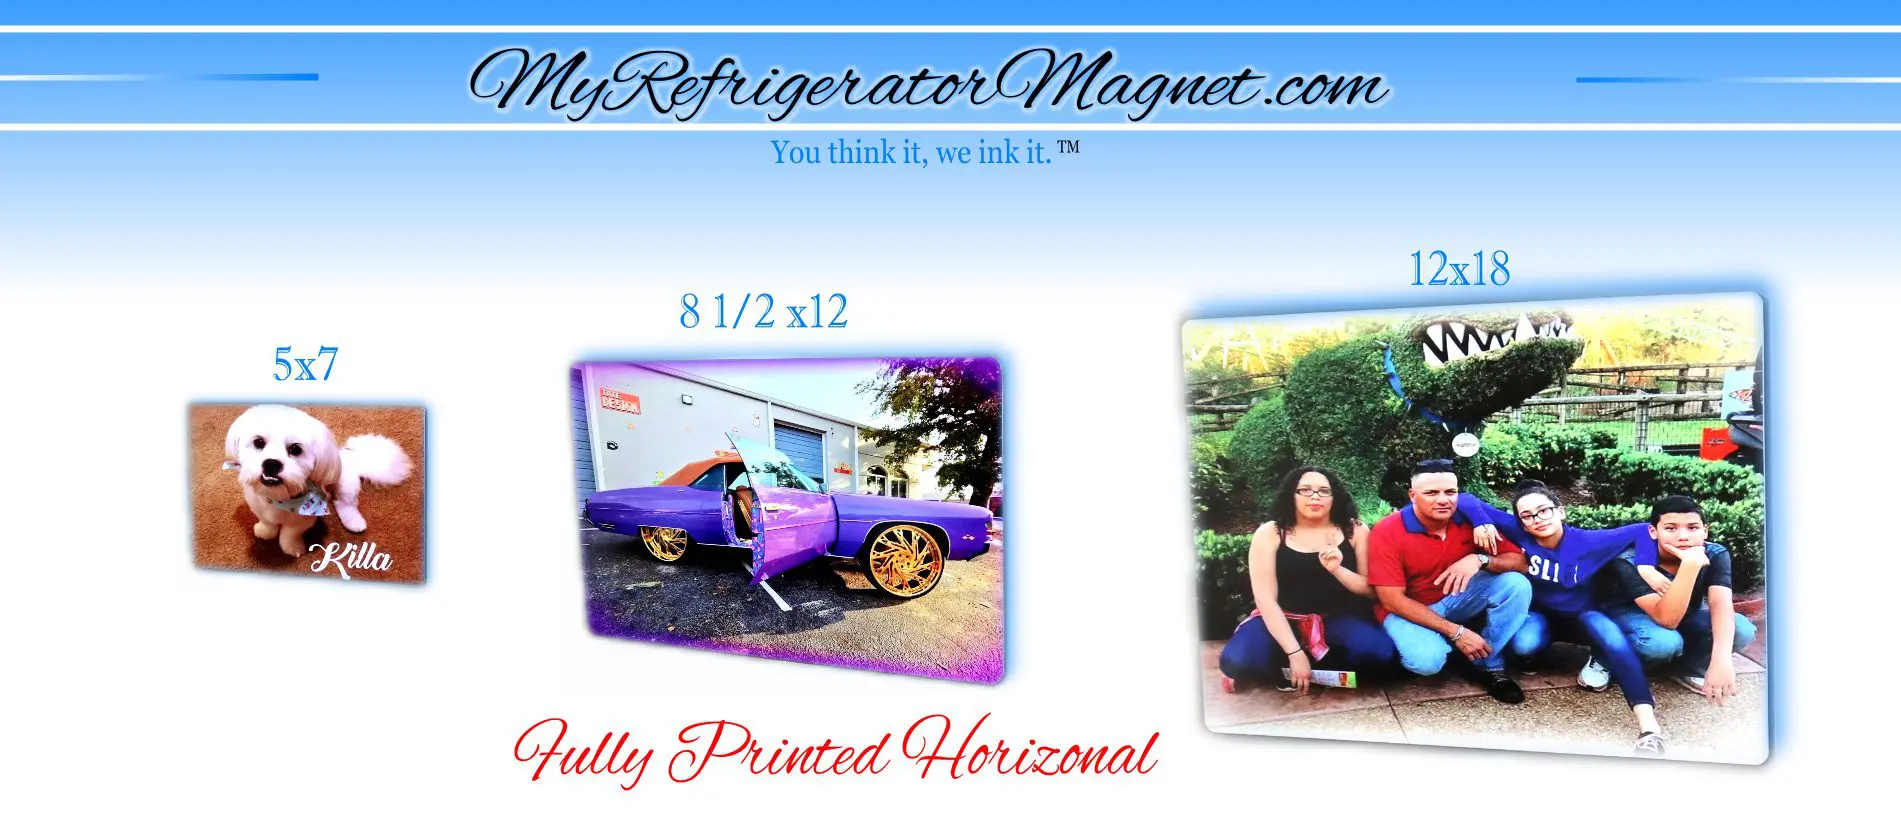 A picture of two people and a car on the front page of a refrigerator magnet.